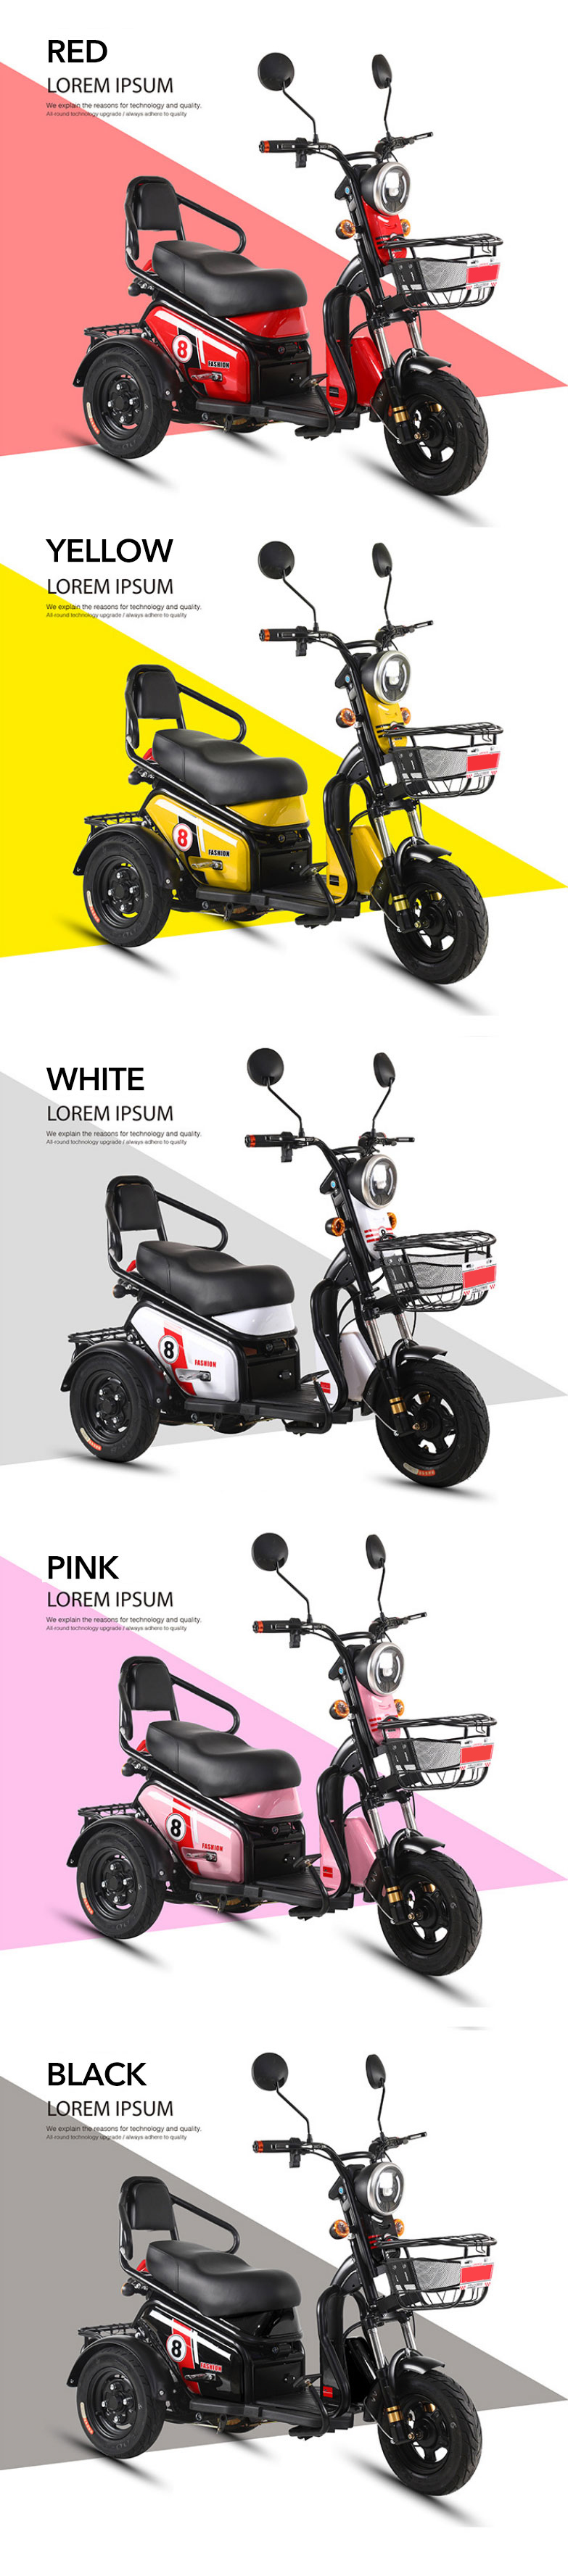 3 wheel two seat mobility folding customized electric bicycle scooter mini e-scooter e scooter motor scooter